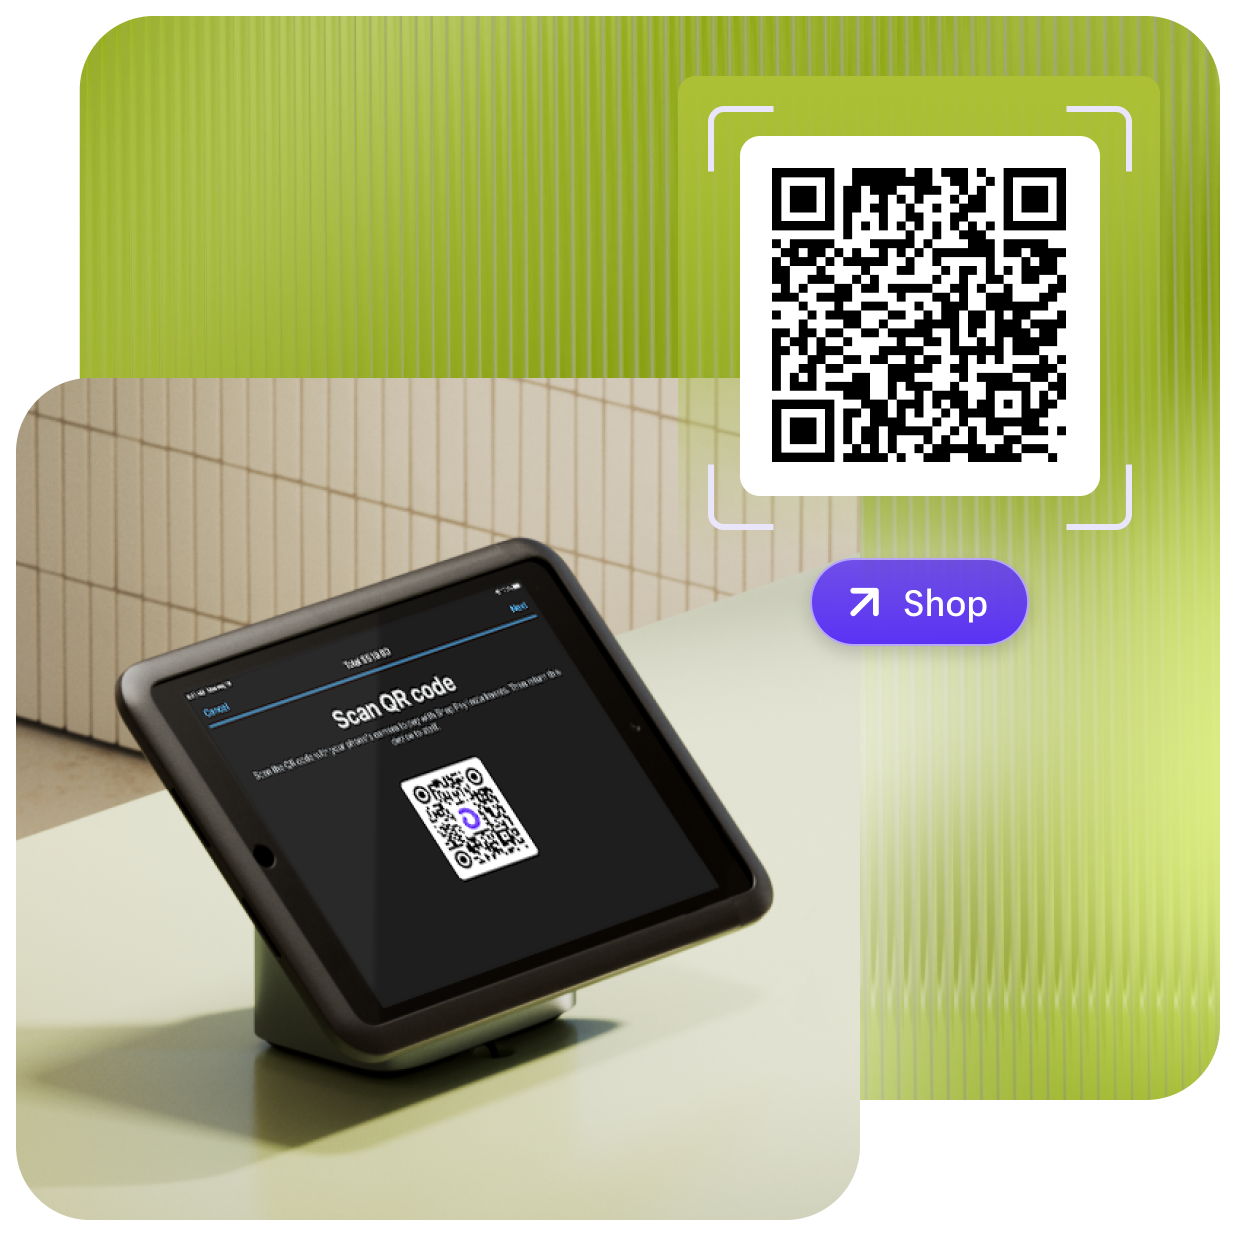 A QR code in Shopify POS is shown on an iPad directing in-store customers to scan with their own device in order pay with Shop Pay Installments in person.